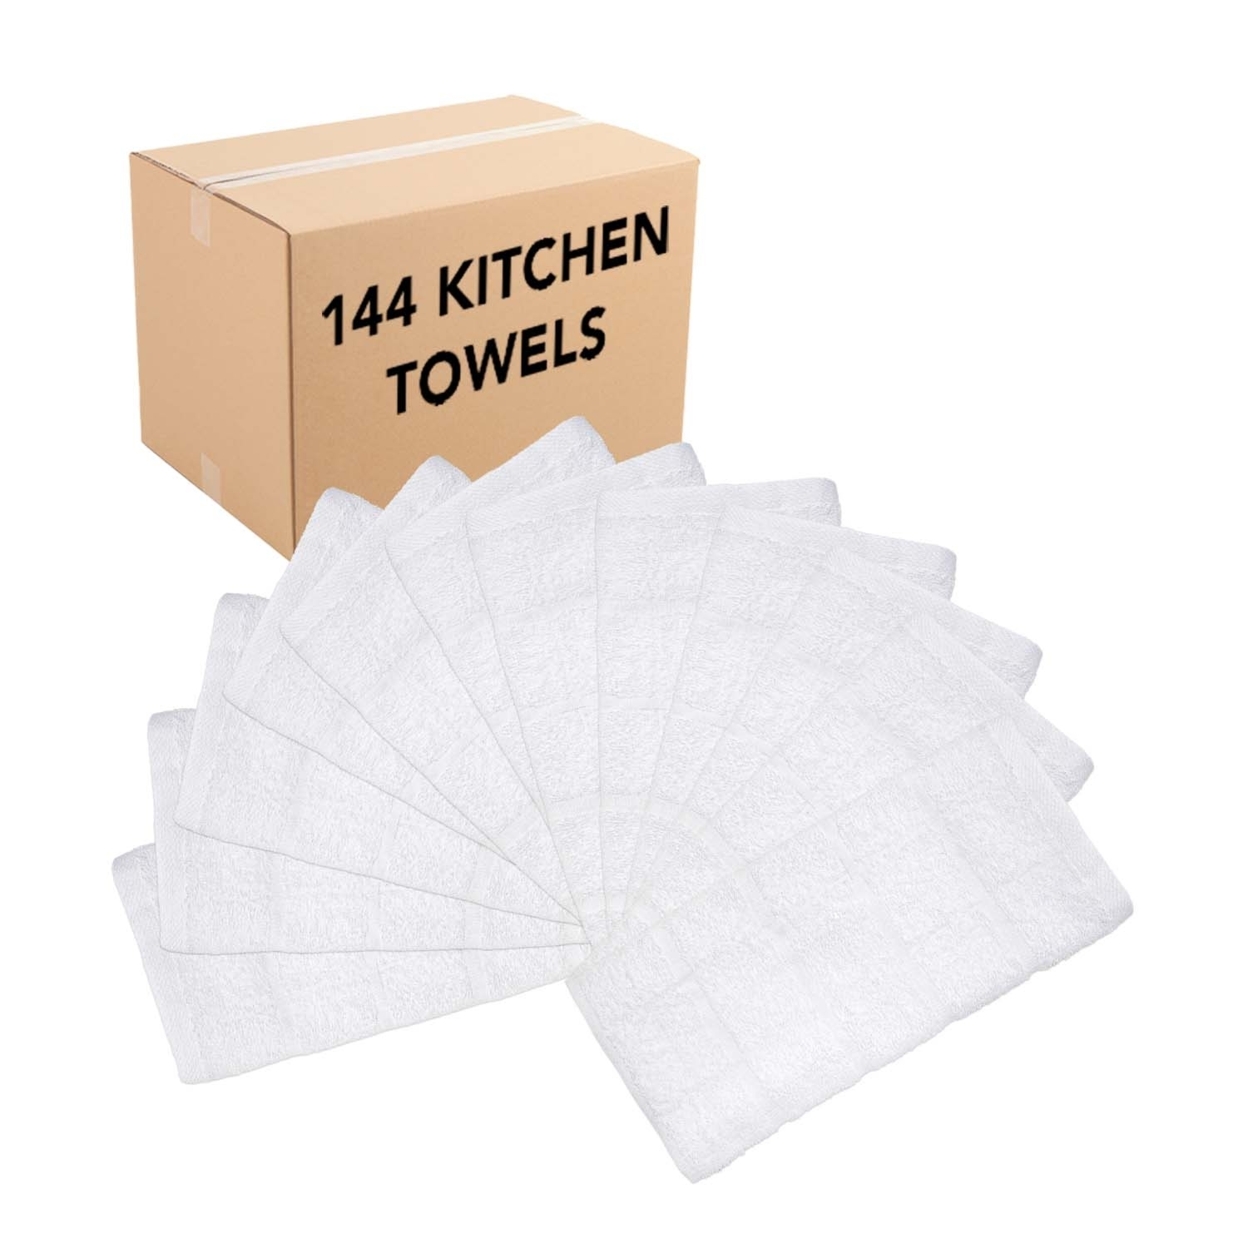 Windowpane Stripe Kitchen Towels 12-Pack, Cotton, 15 x 25 in., Six Stripe Colors, Buy a 12-Pack or Buy a Case of 144 - White, Case of 144